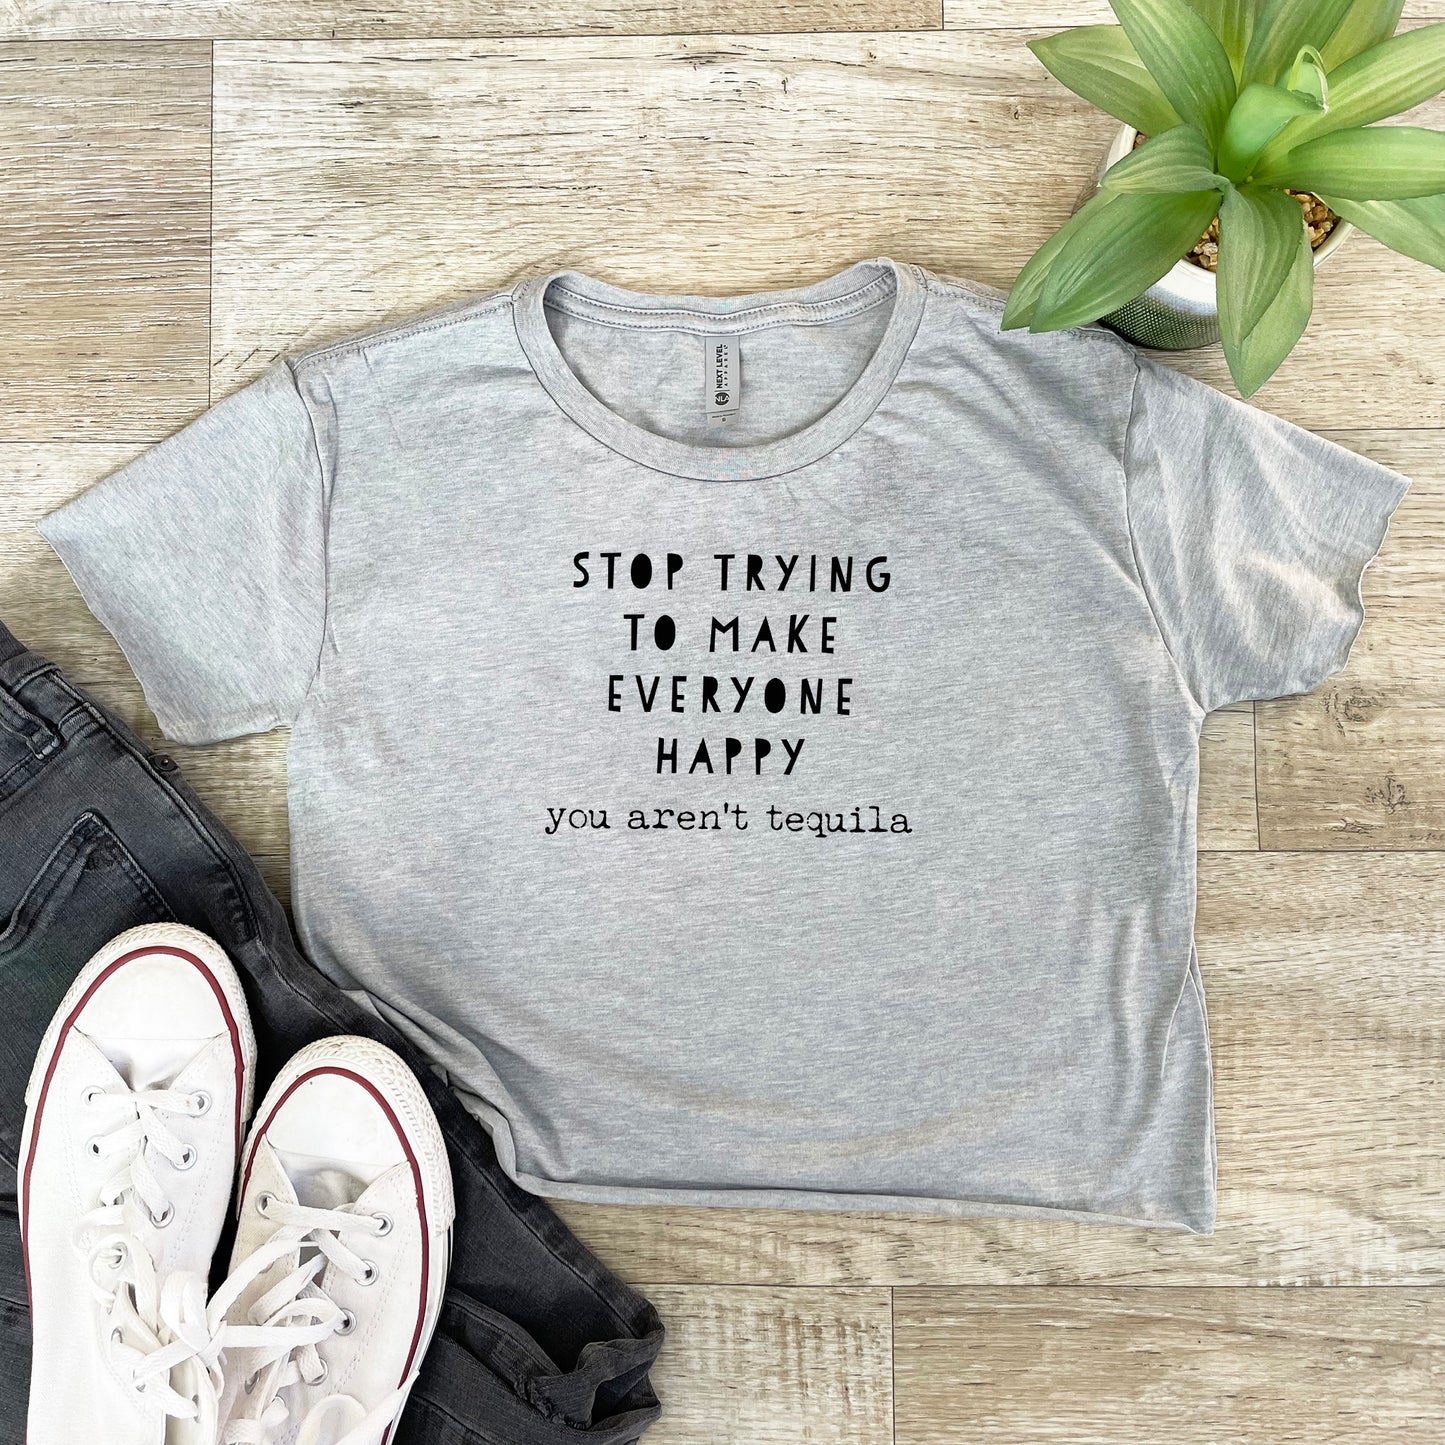 Stop Trying To Make Everyone Happy... You Aren't Tequila - Women's Crop Tee - Heather Gray or Gold